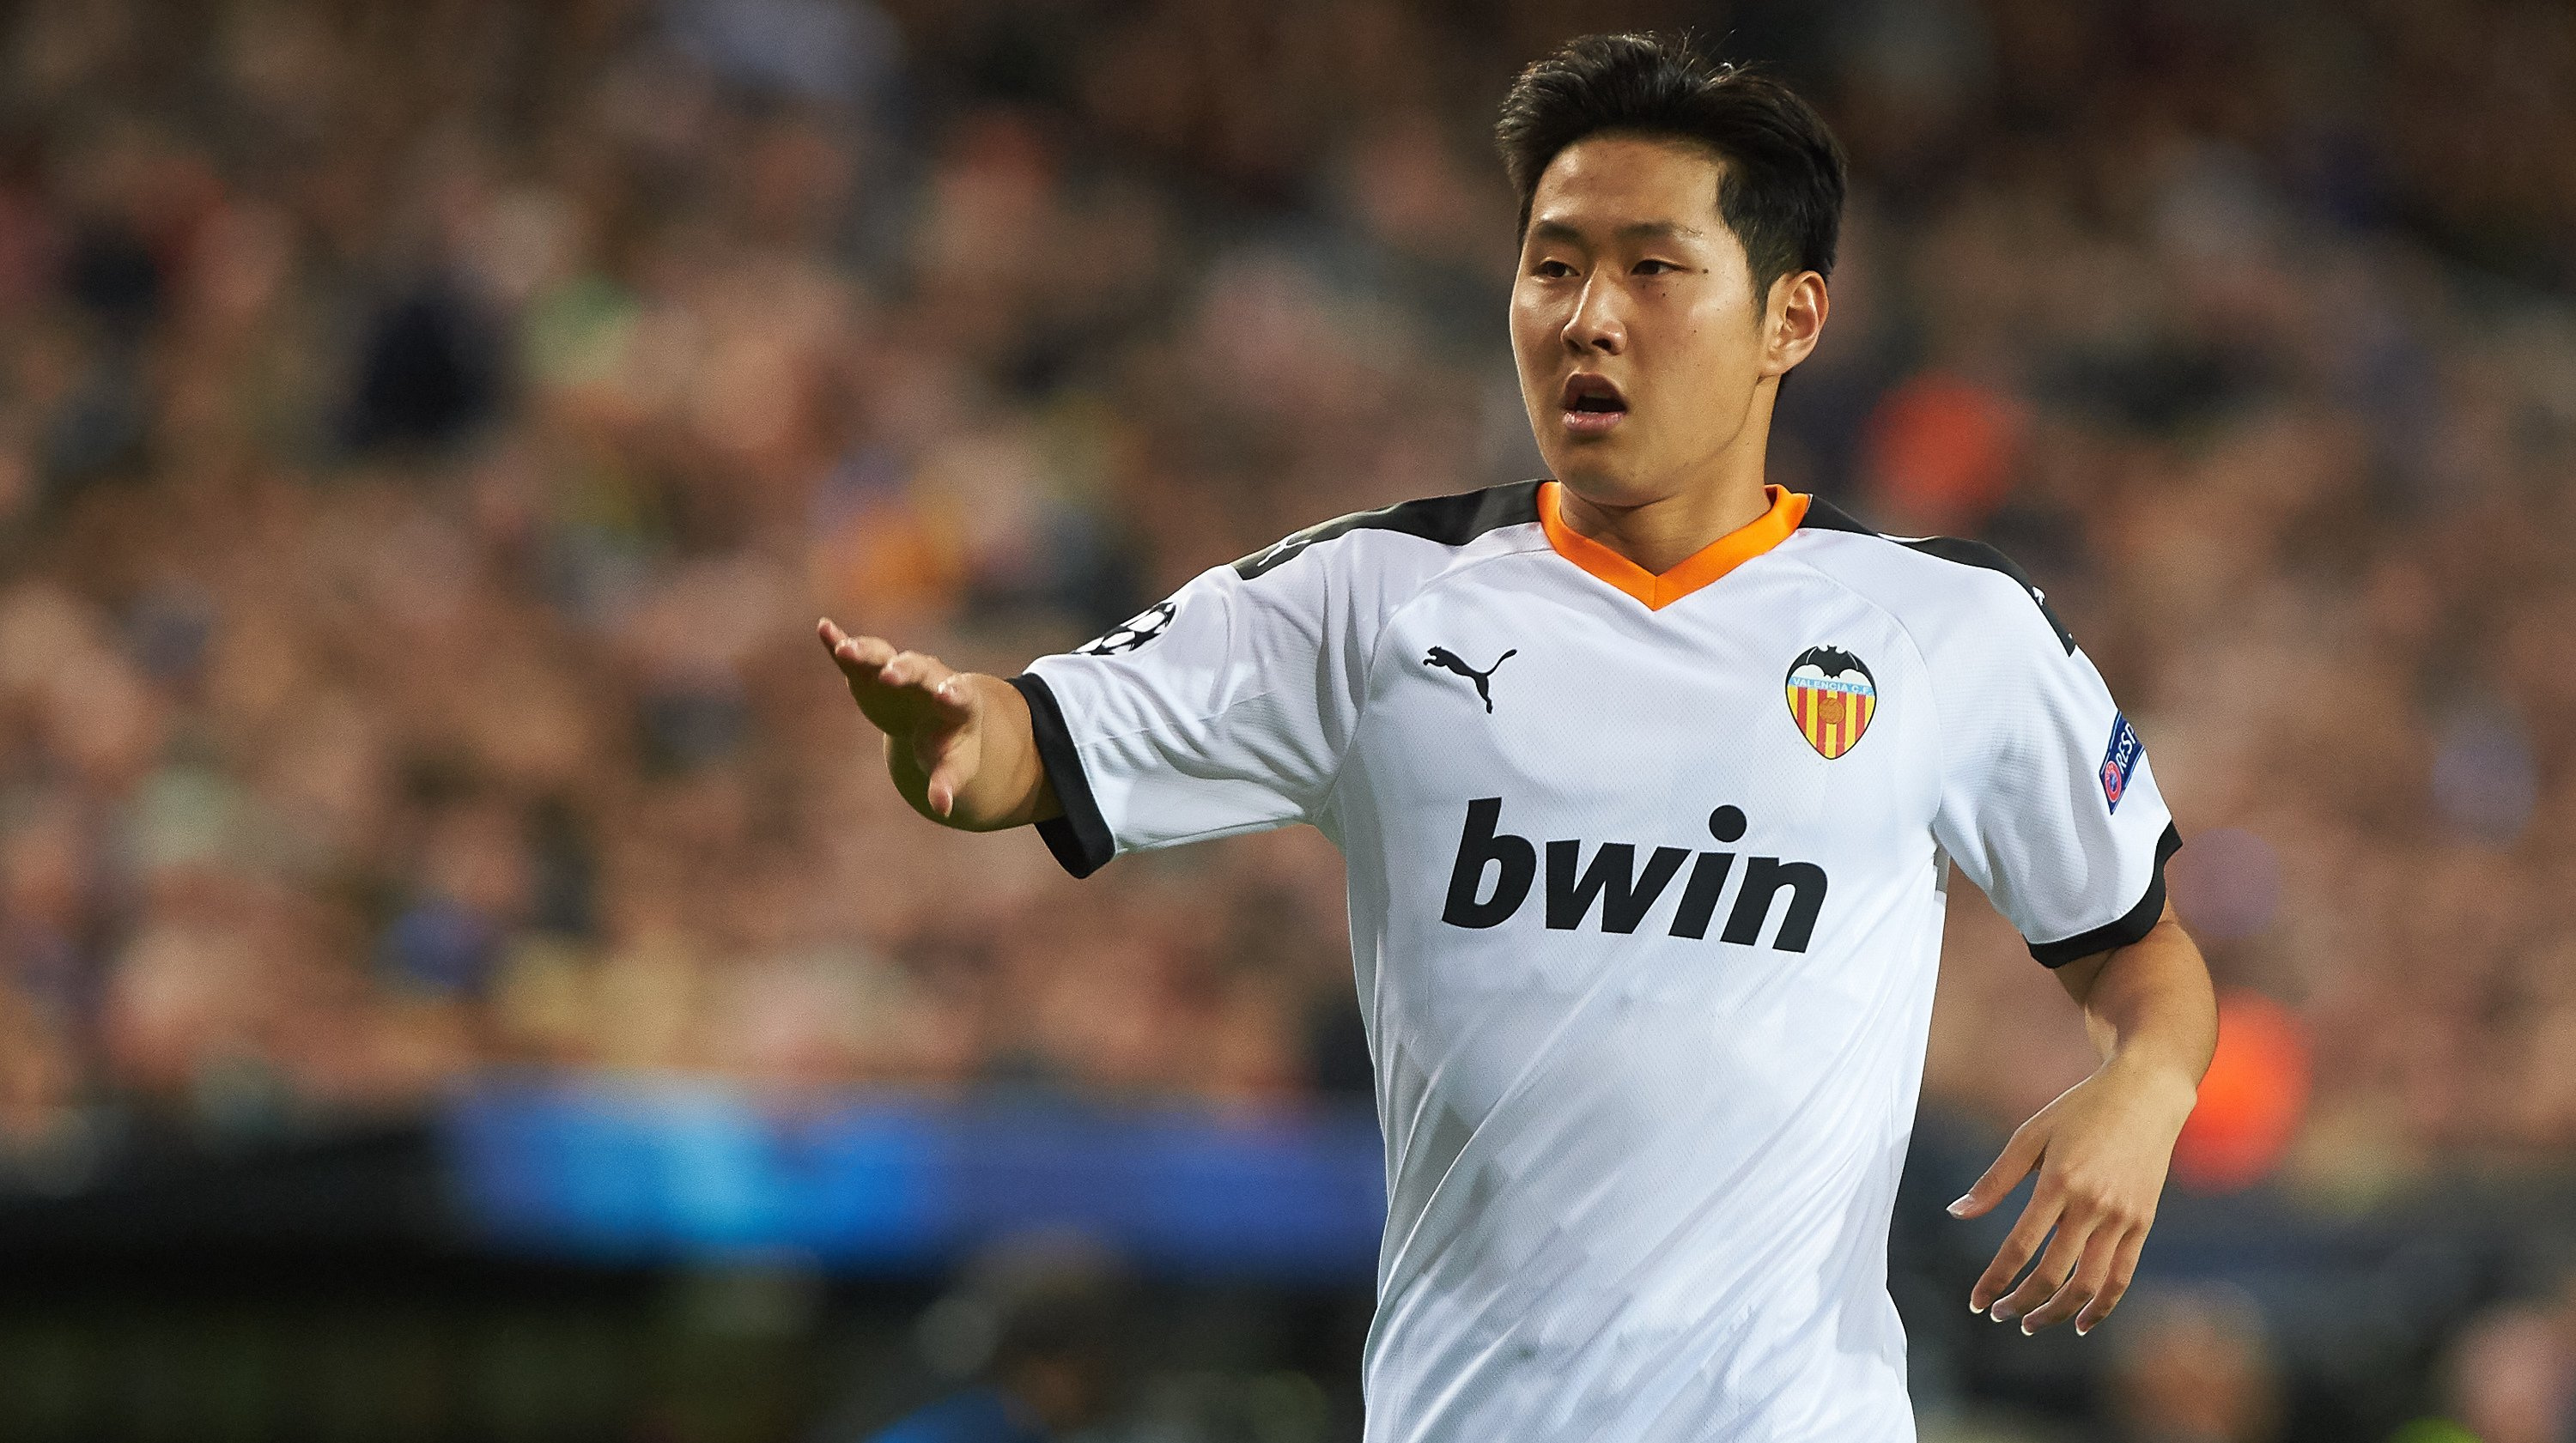 Lee Kang-in - The Success Of The South Korean Football Prodigy